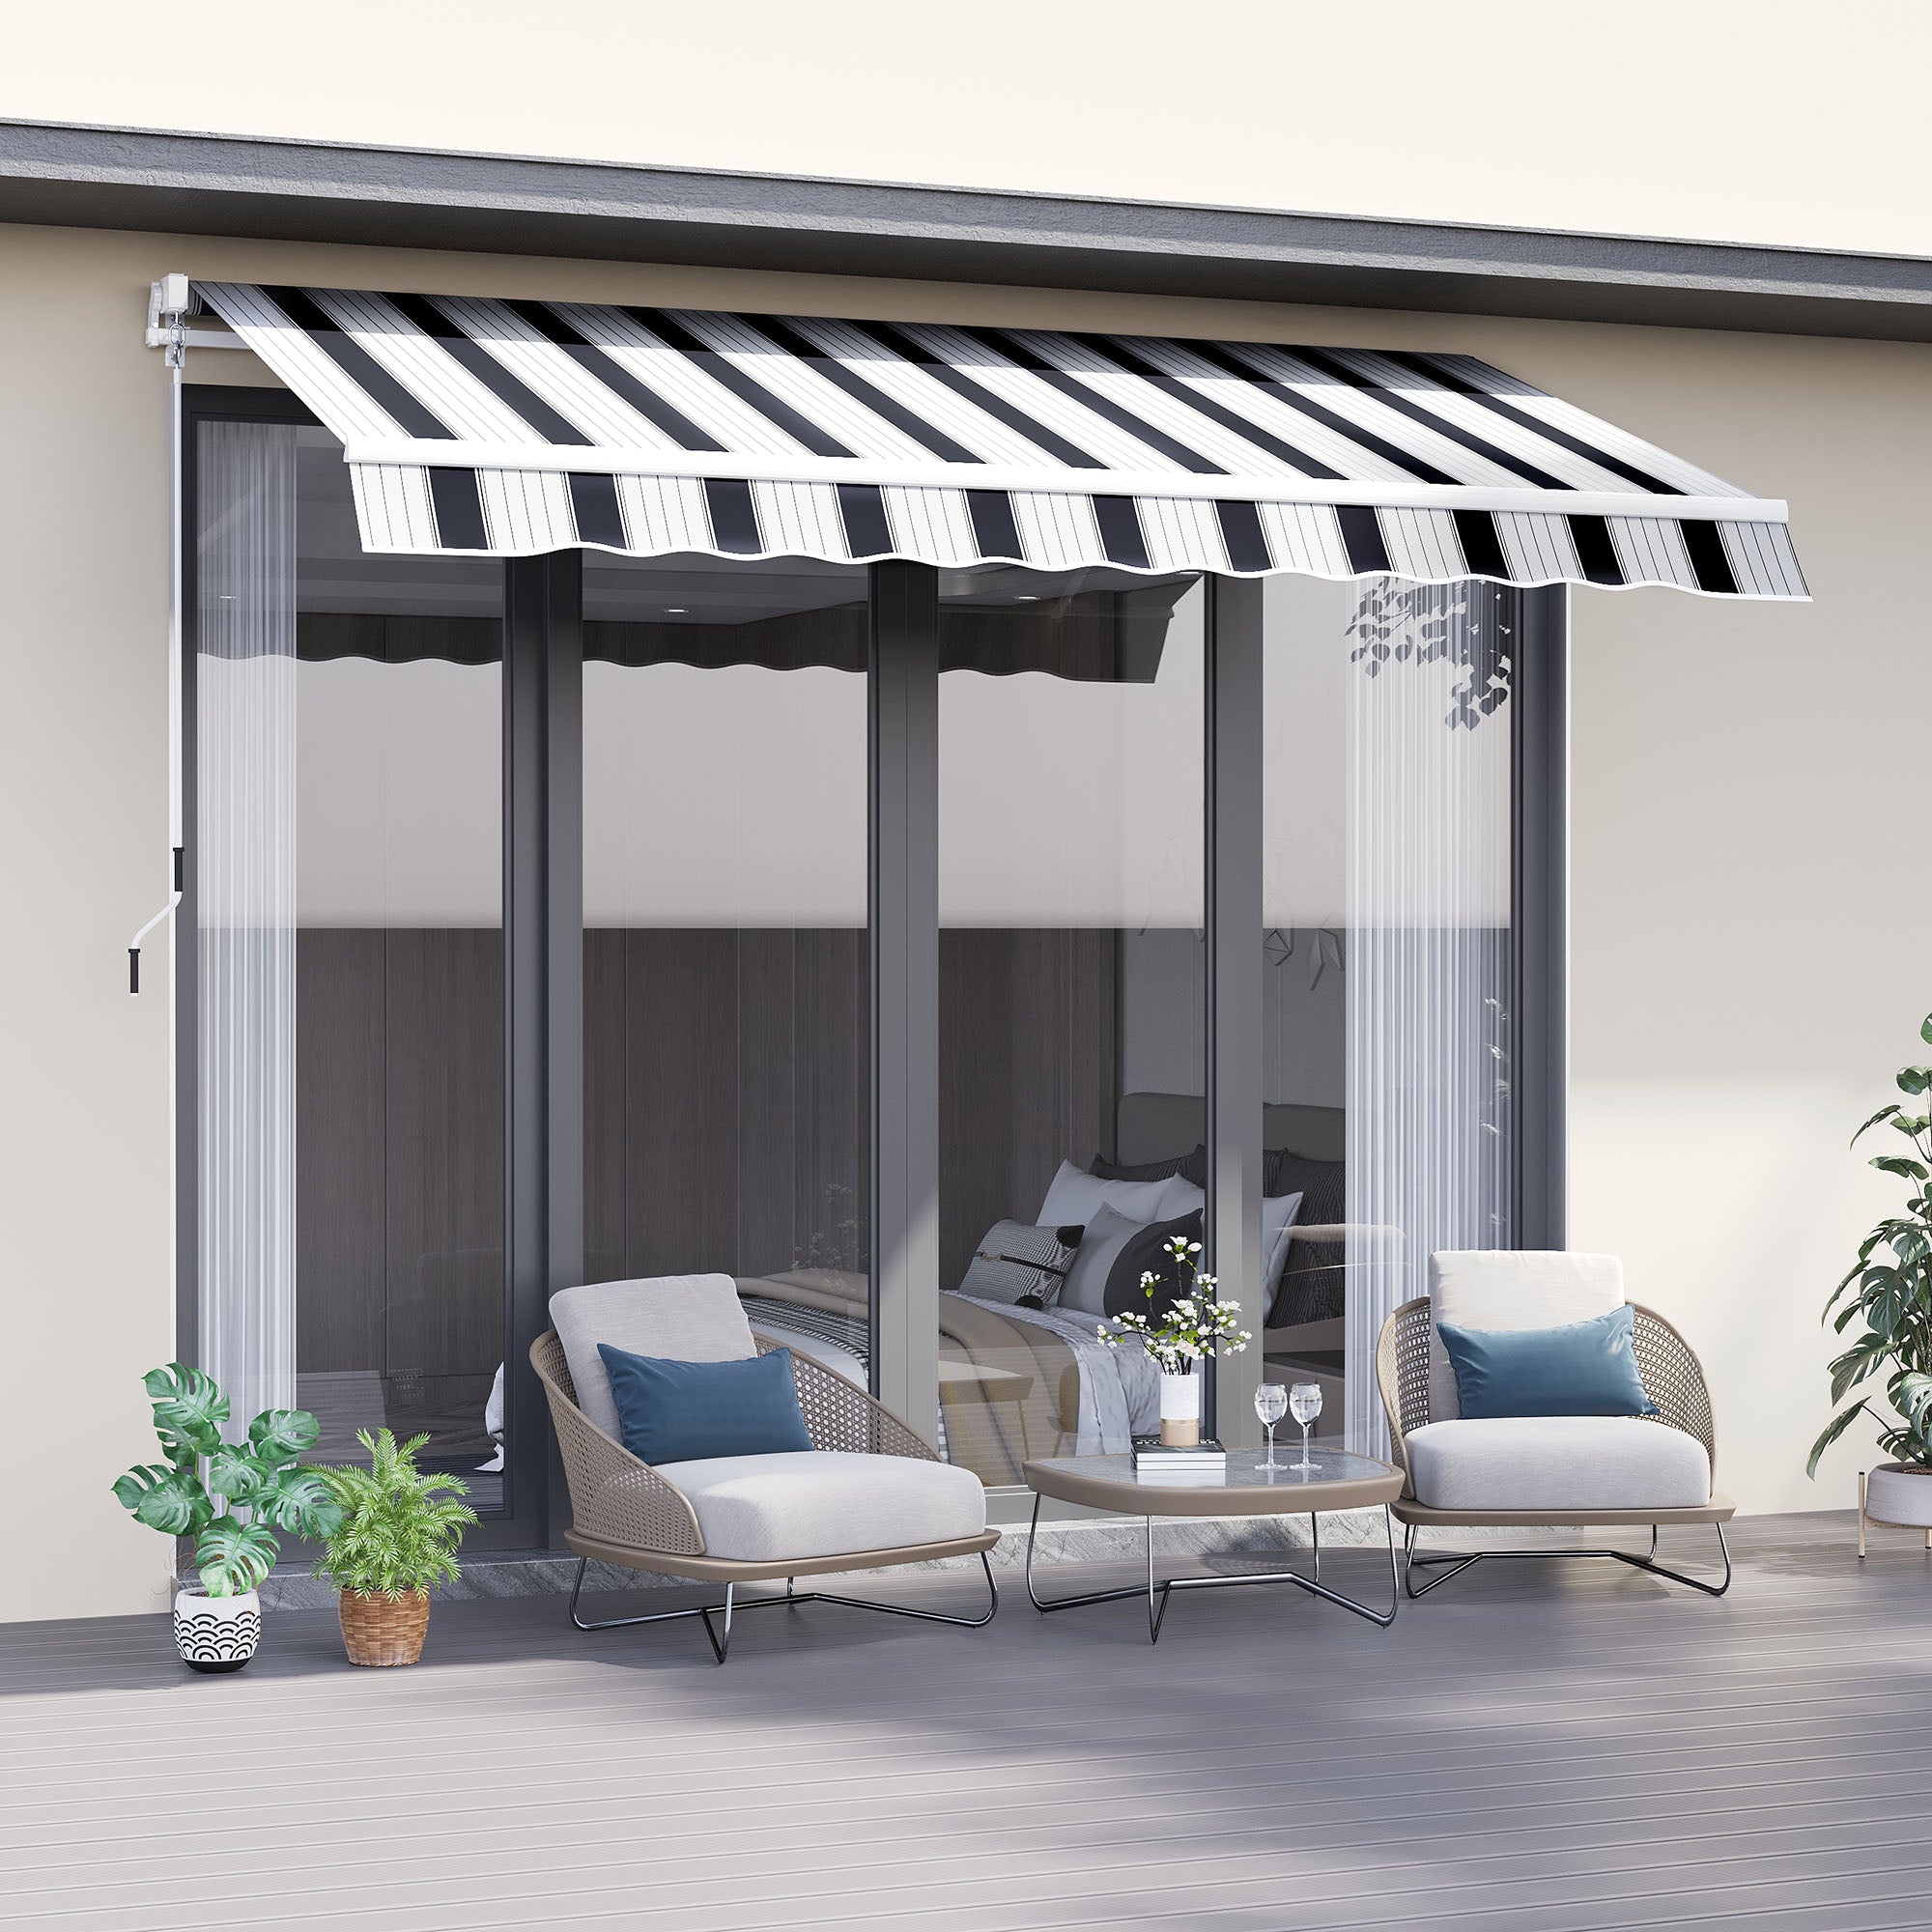 Outsunny 2.5m x 2m Garden Patio Manual Awning Canopy Sun Shade Shelter Retractable with Winding Handle Blue White - Inspirely